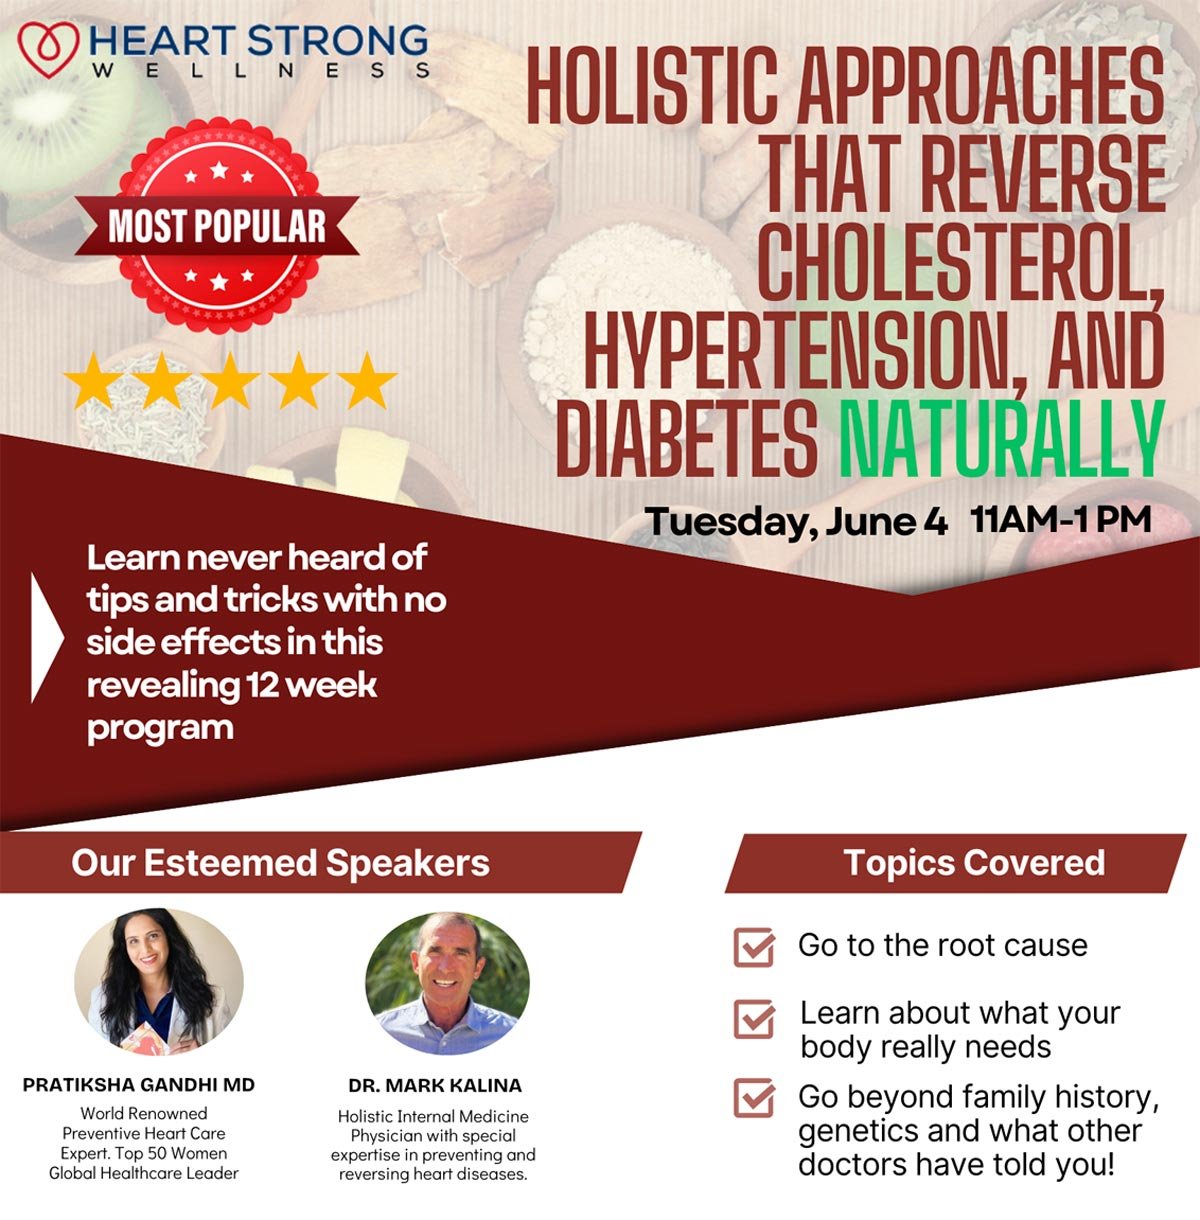 June 4 Event: Holistic Approaches that Reverse Cholesterol, Hypertension, and Diabetes Naturally